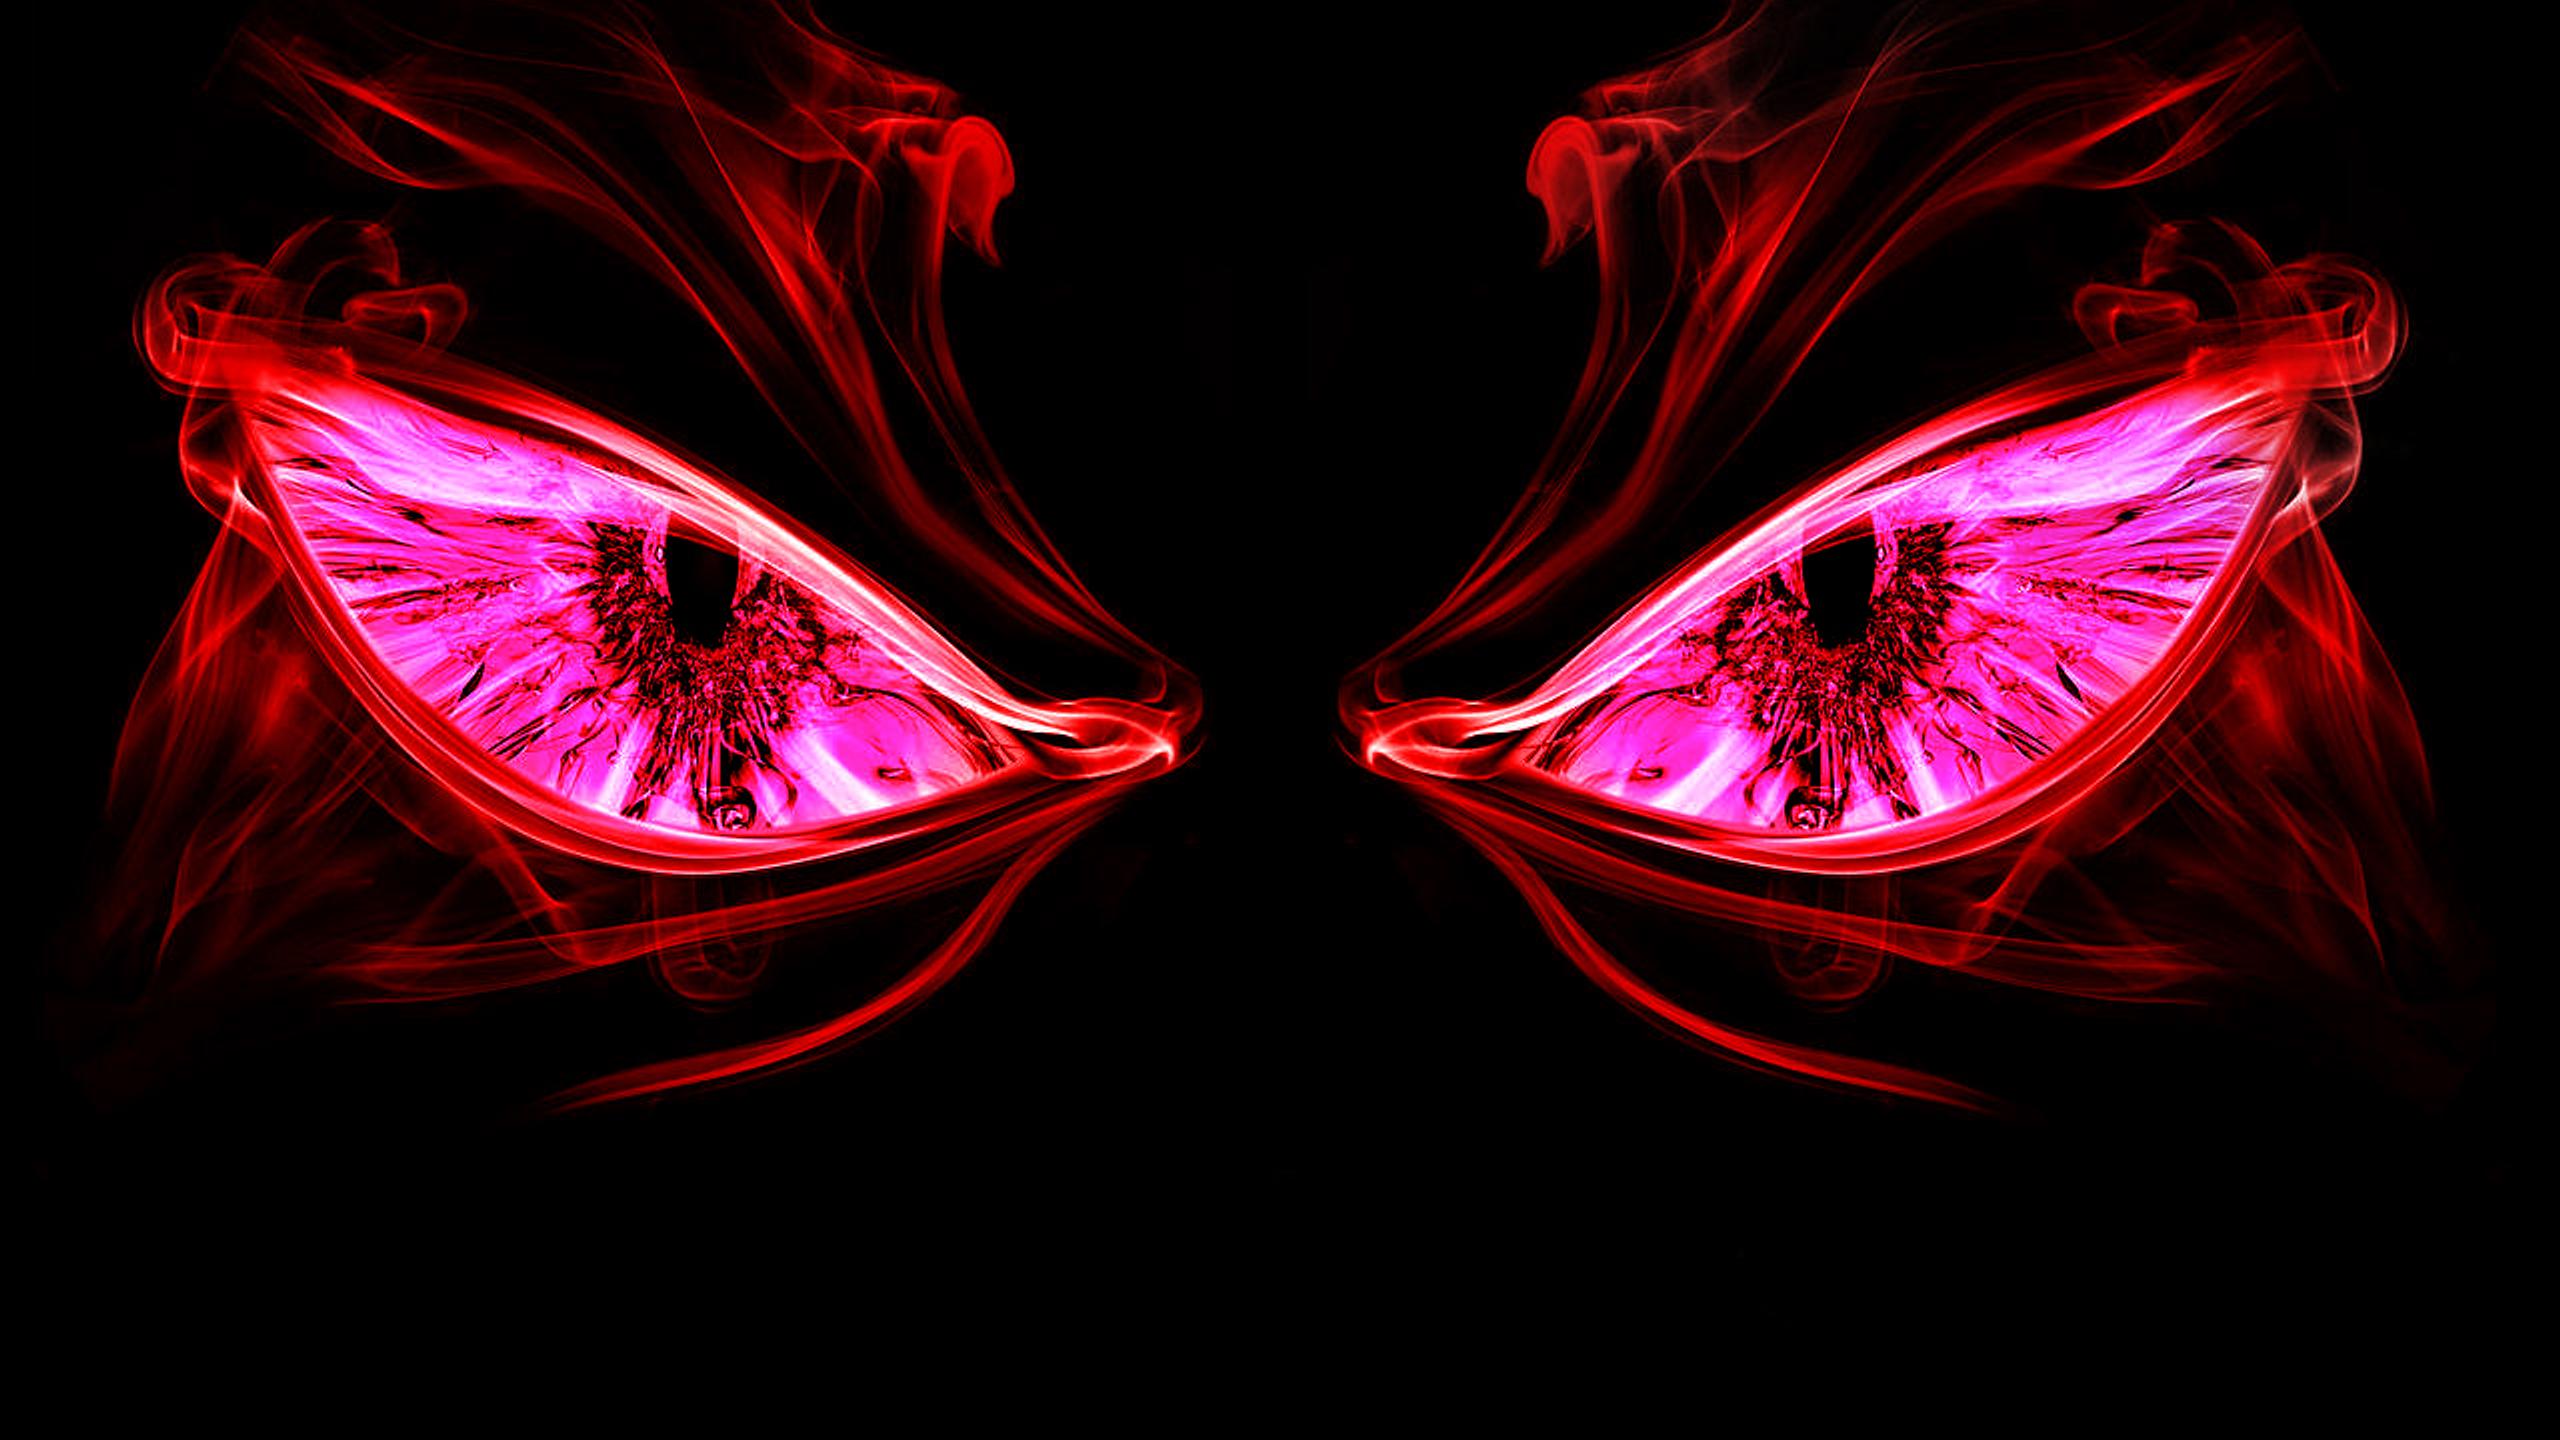 Two scary red eyes in the night